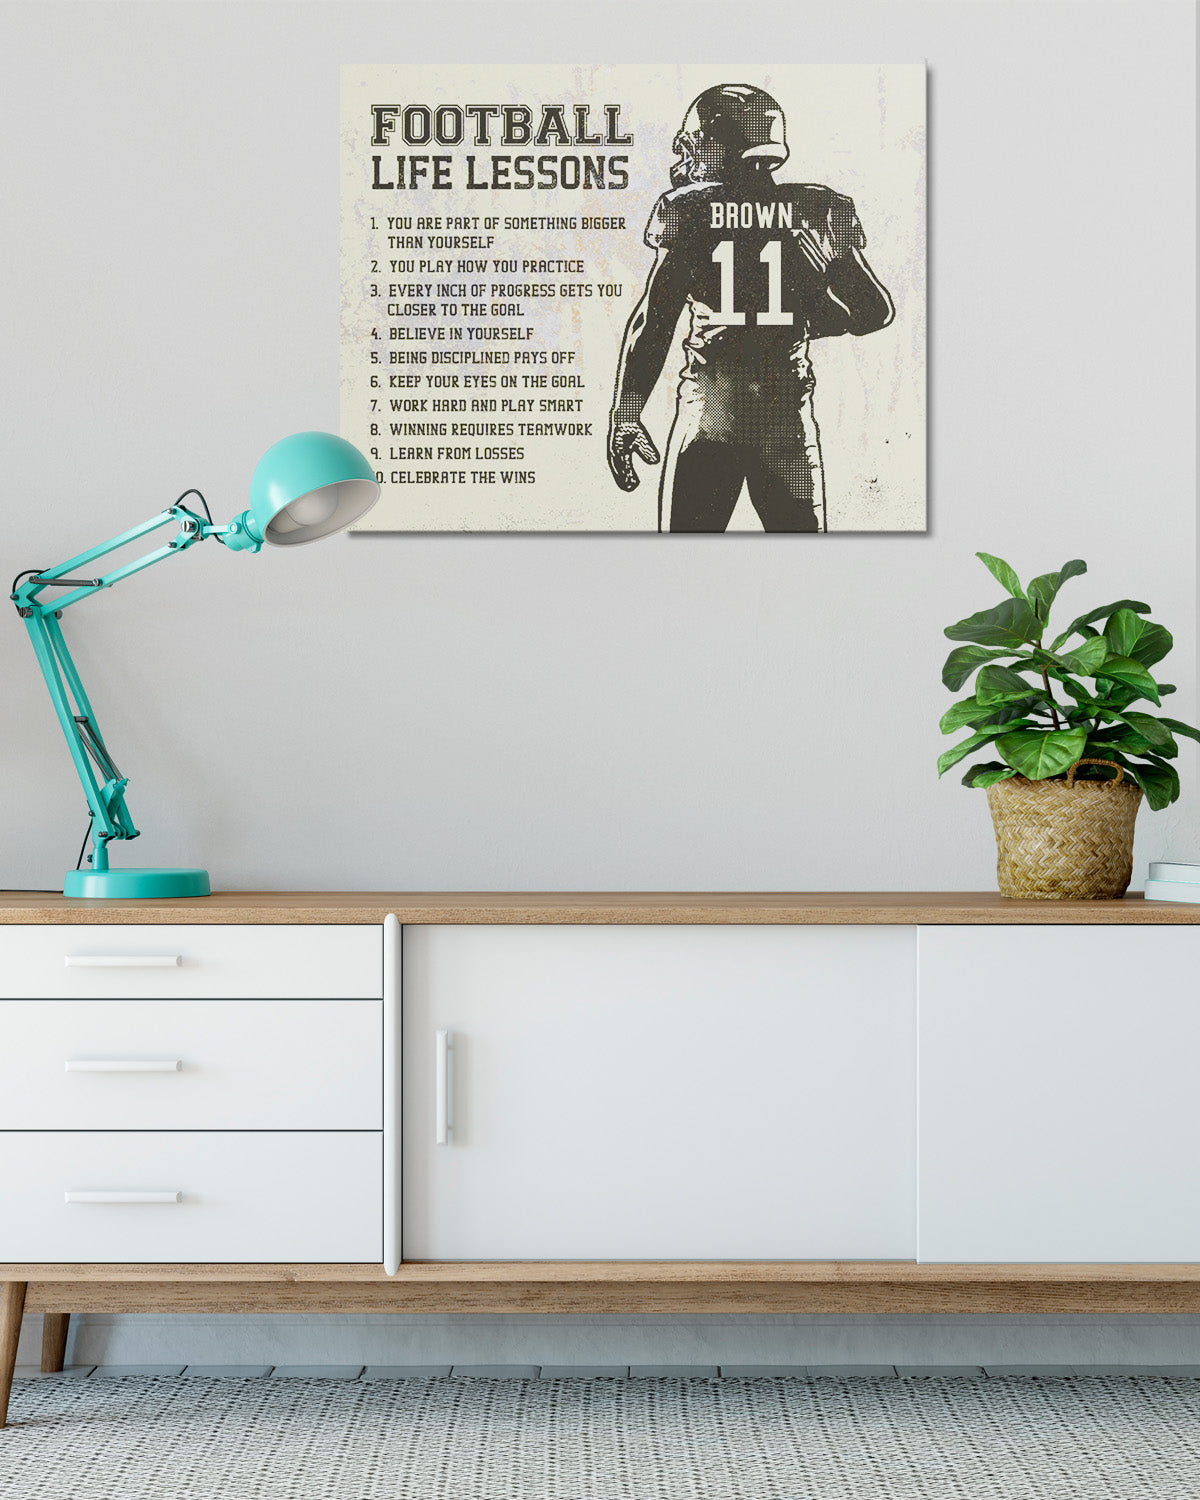 Football Life Lessons - Customizable with Last Name - Motivational Football Wall Art for Boys Bedroom, Locker Room, or Coach Gift - Inspirational Football Quotes